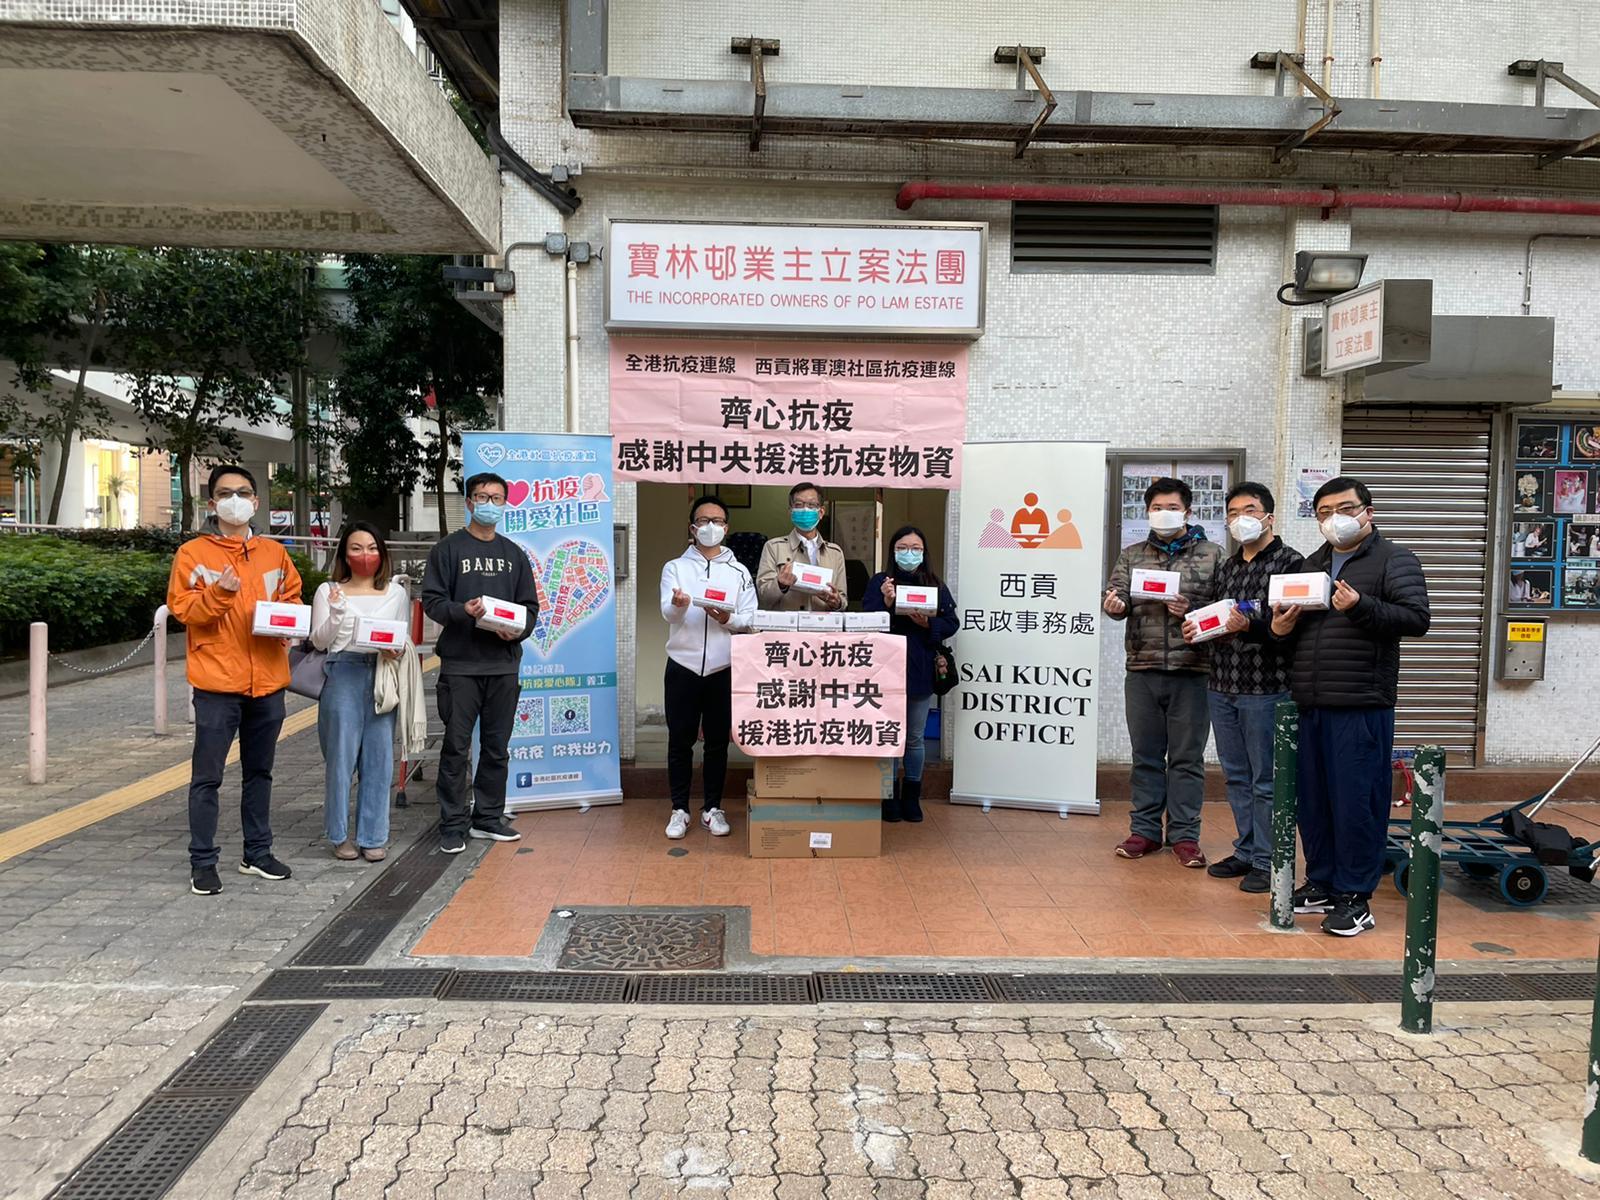 The Sai Kung District Office, together with the Hong Kong Community Anti-Coronavirus Link, set up street booths in the district, and distributed rapid test kits through owners' corporations, property management companies and district networks to residents, cleansing workers and property management staff living and working in Sai Kung on February 27.